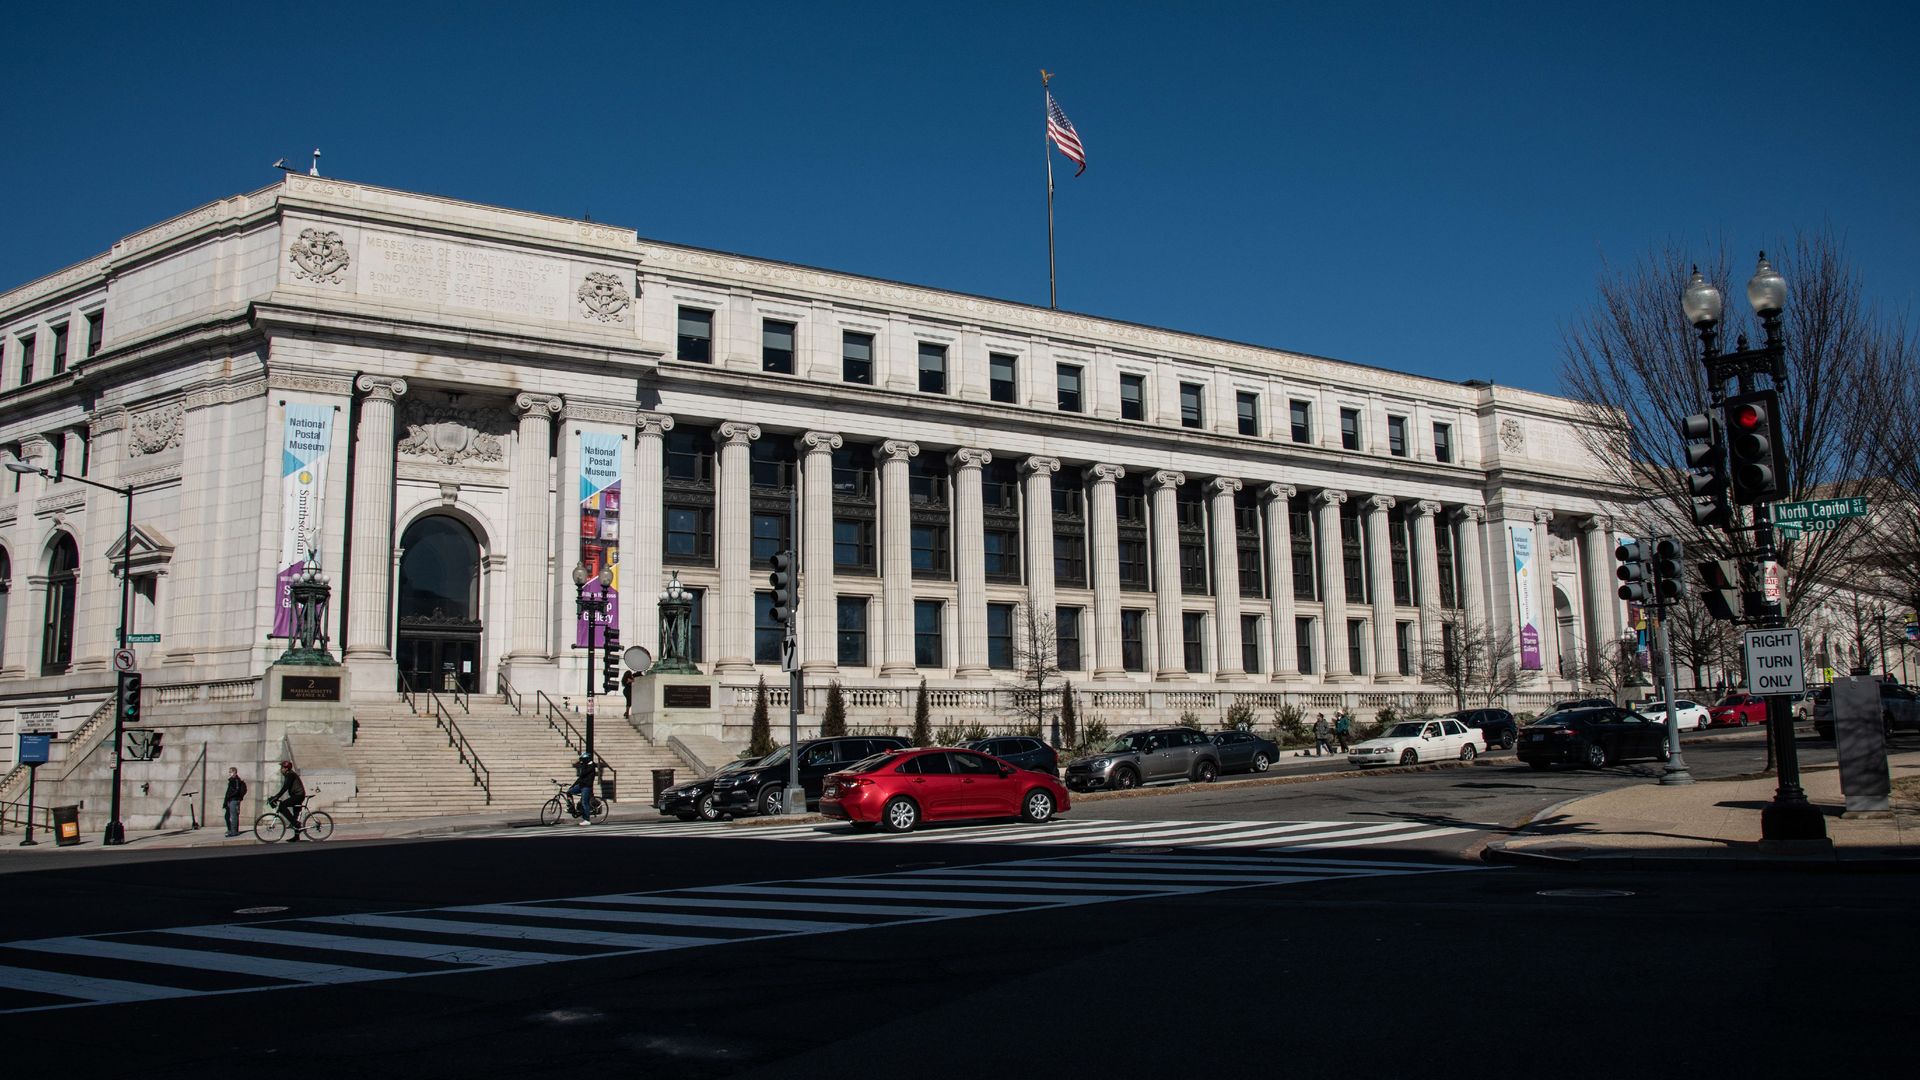 The National Postal Museum in Washington D.C.